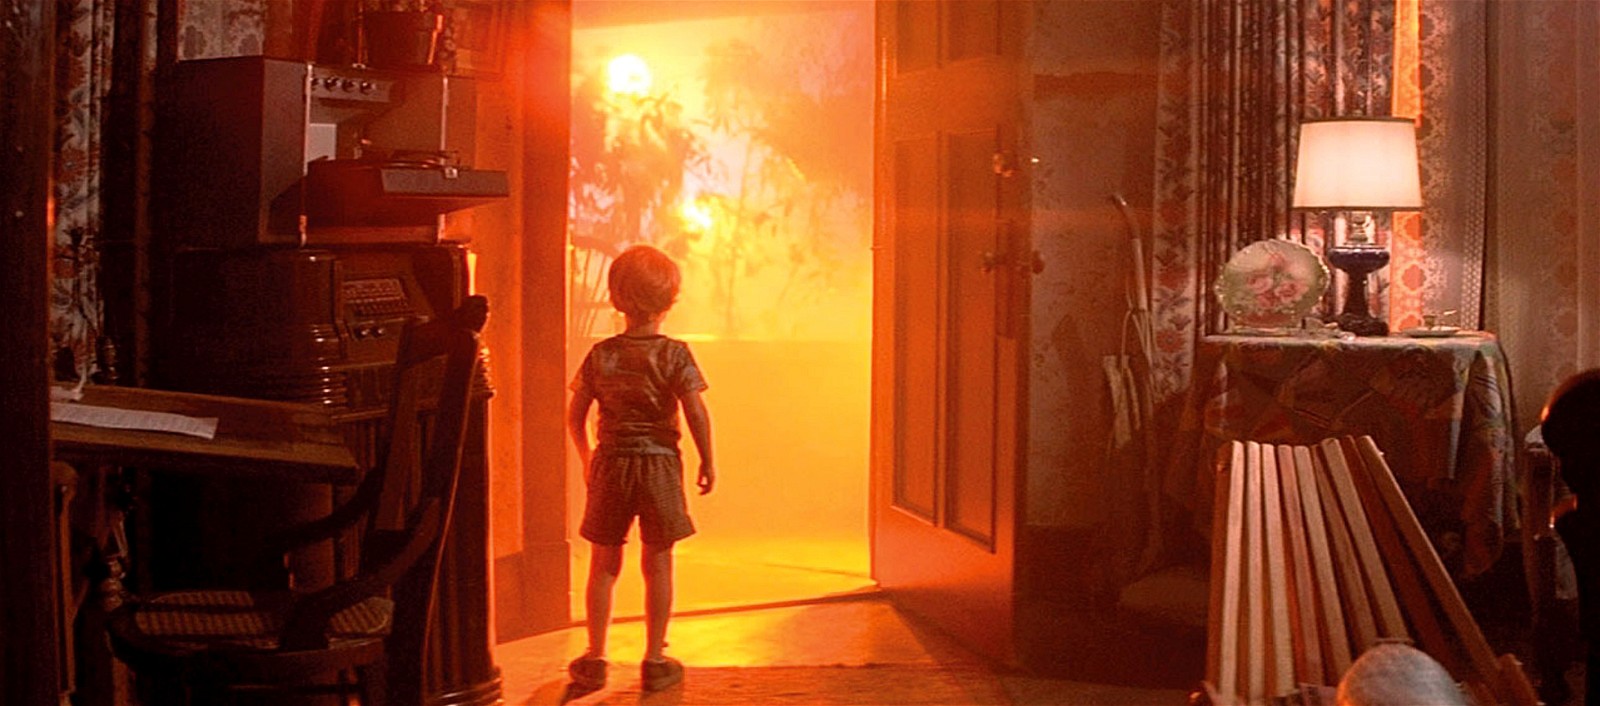 A still from Close Encounters of the Third Kind